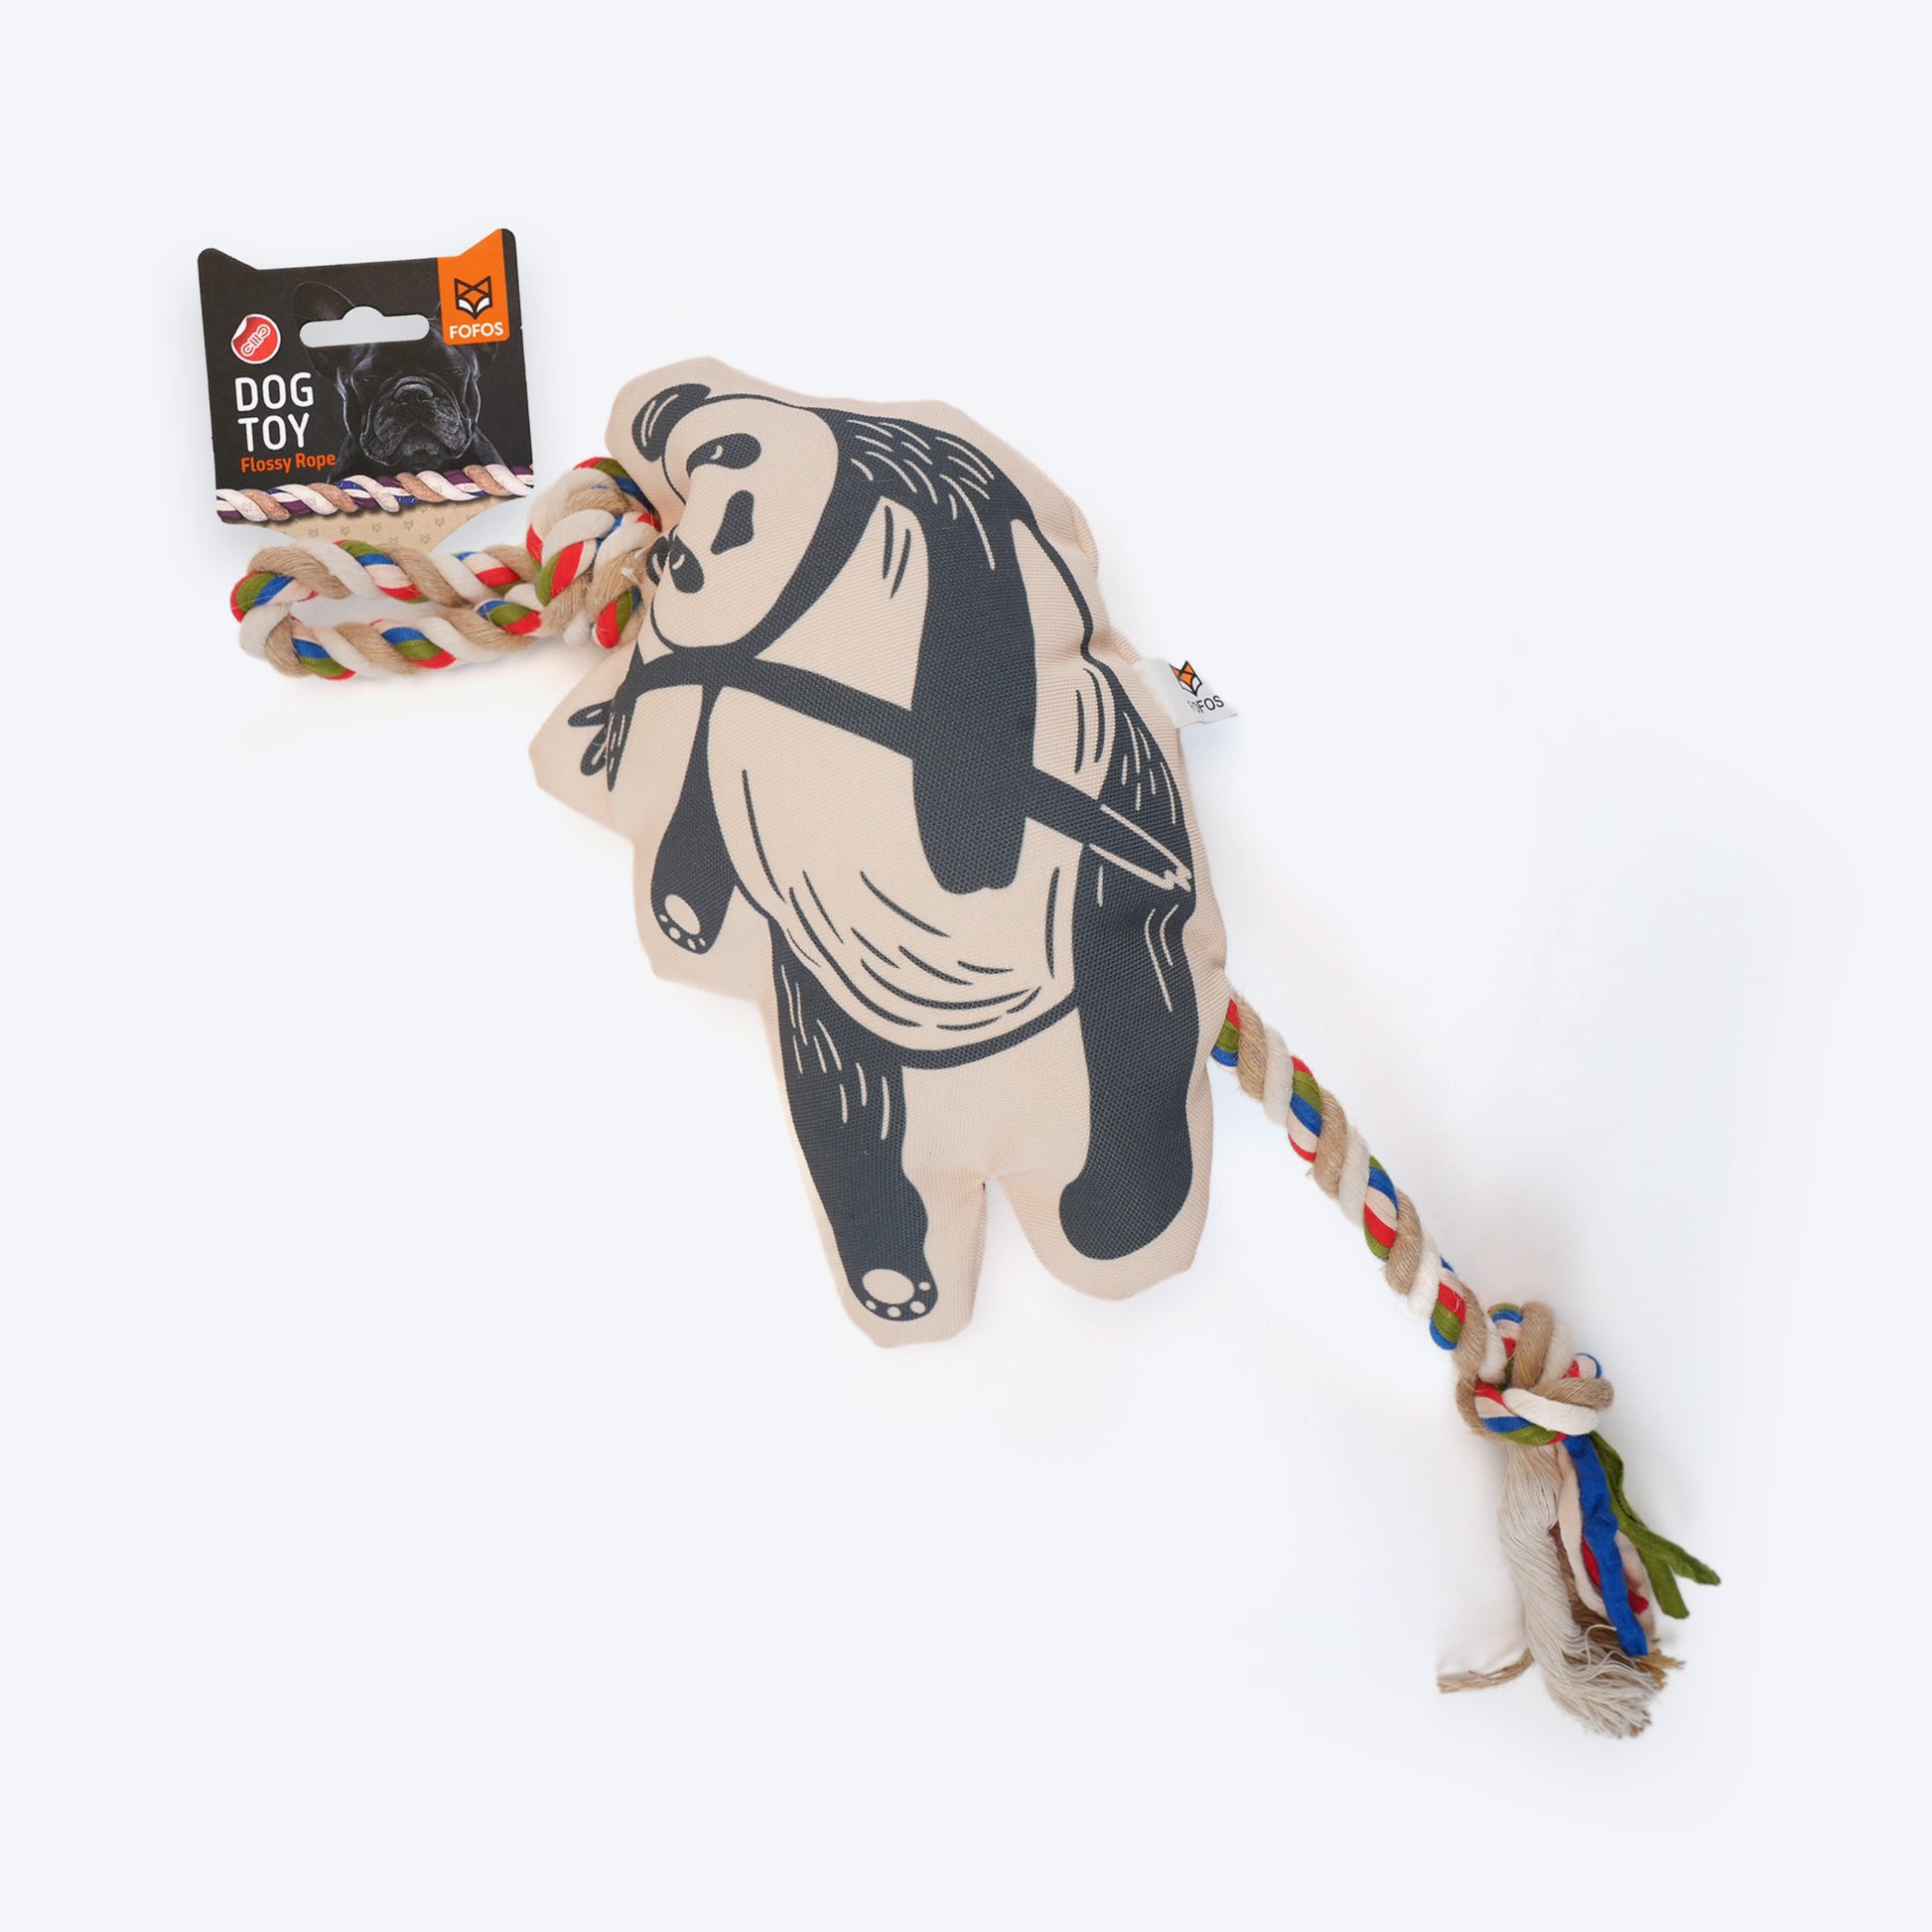 FOFOS Panda Squeaky With Flossy Rope Dog Toy - Black - Heads Up For Tails